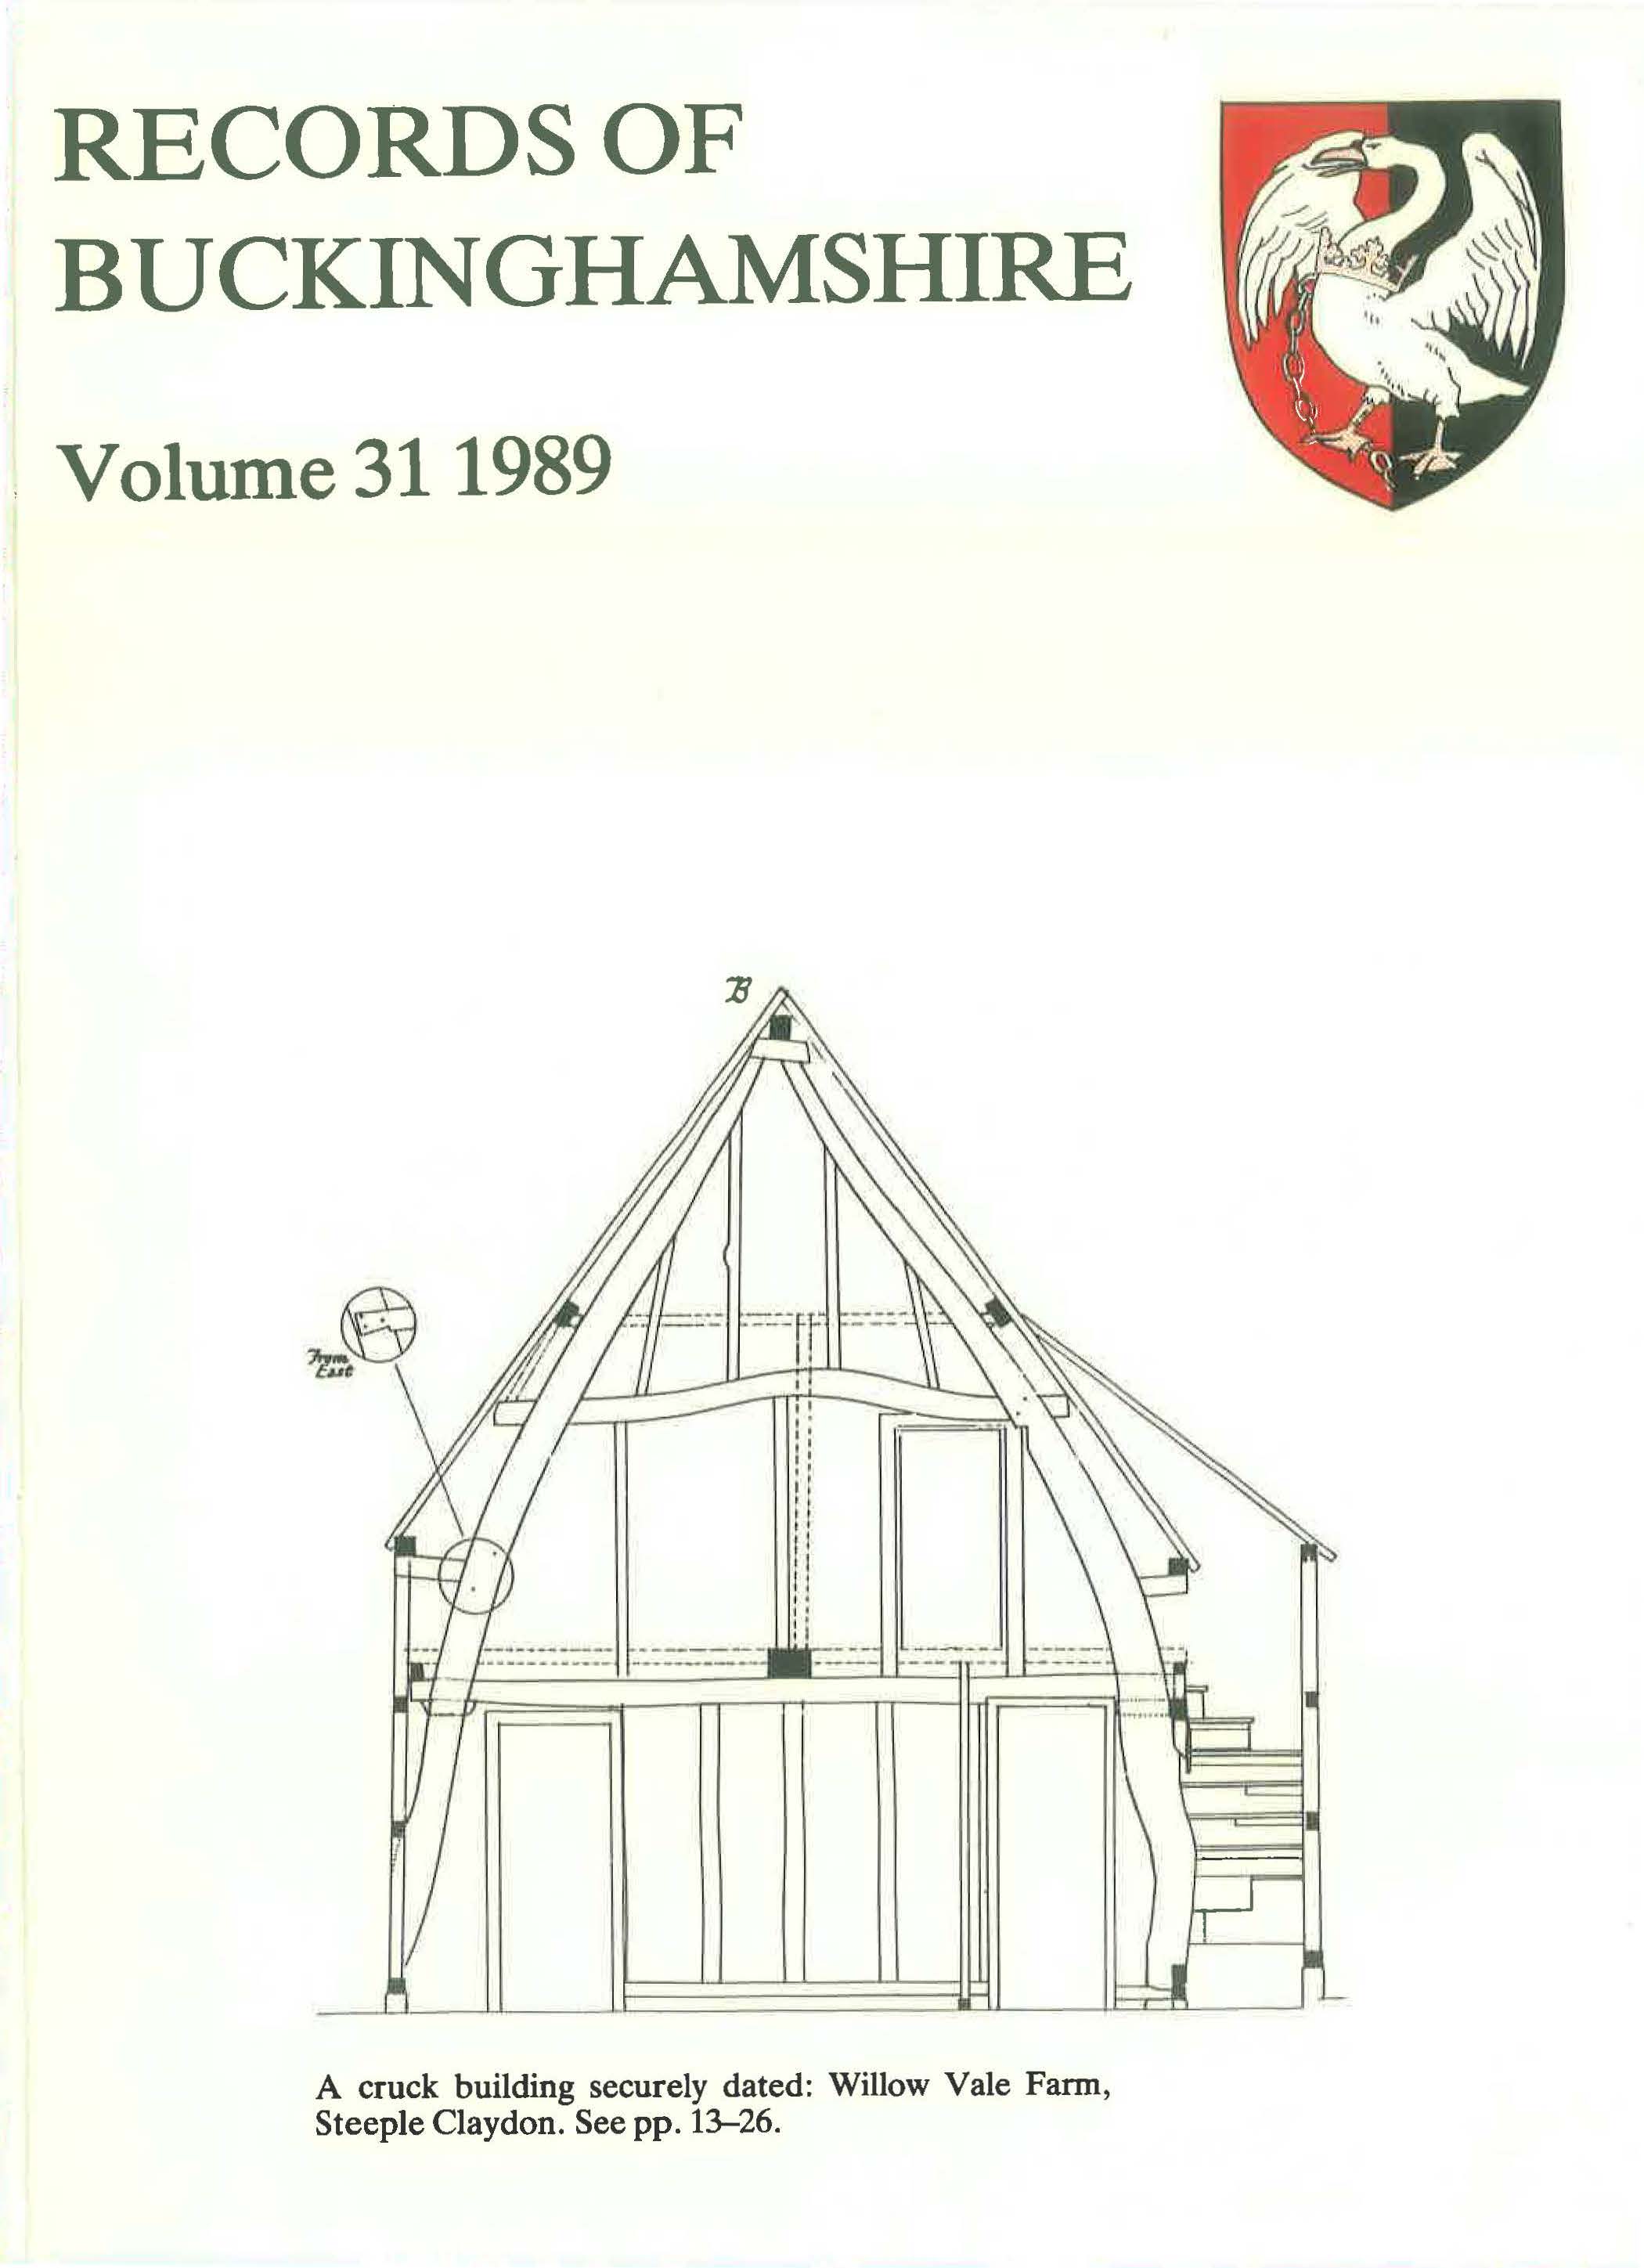 Cover of Records volume 31